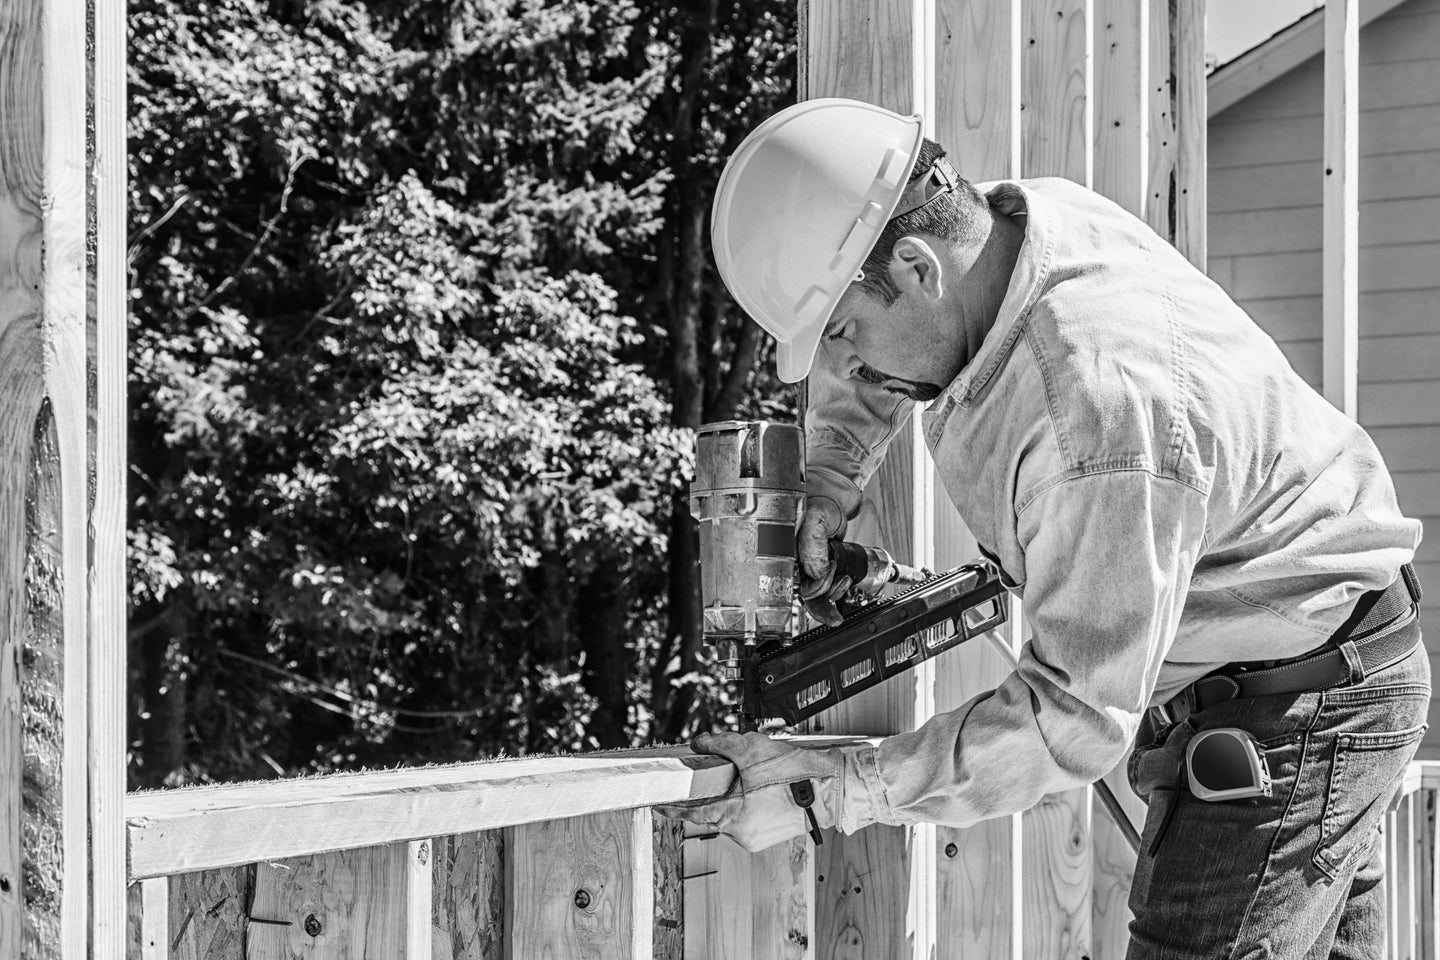 Construction worker with nail gun framing window opening on home building job site